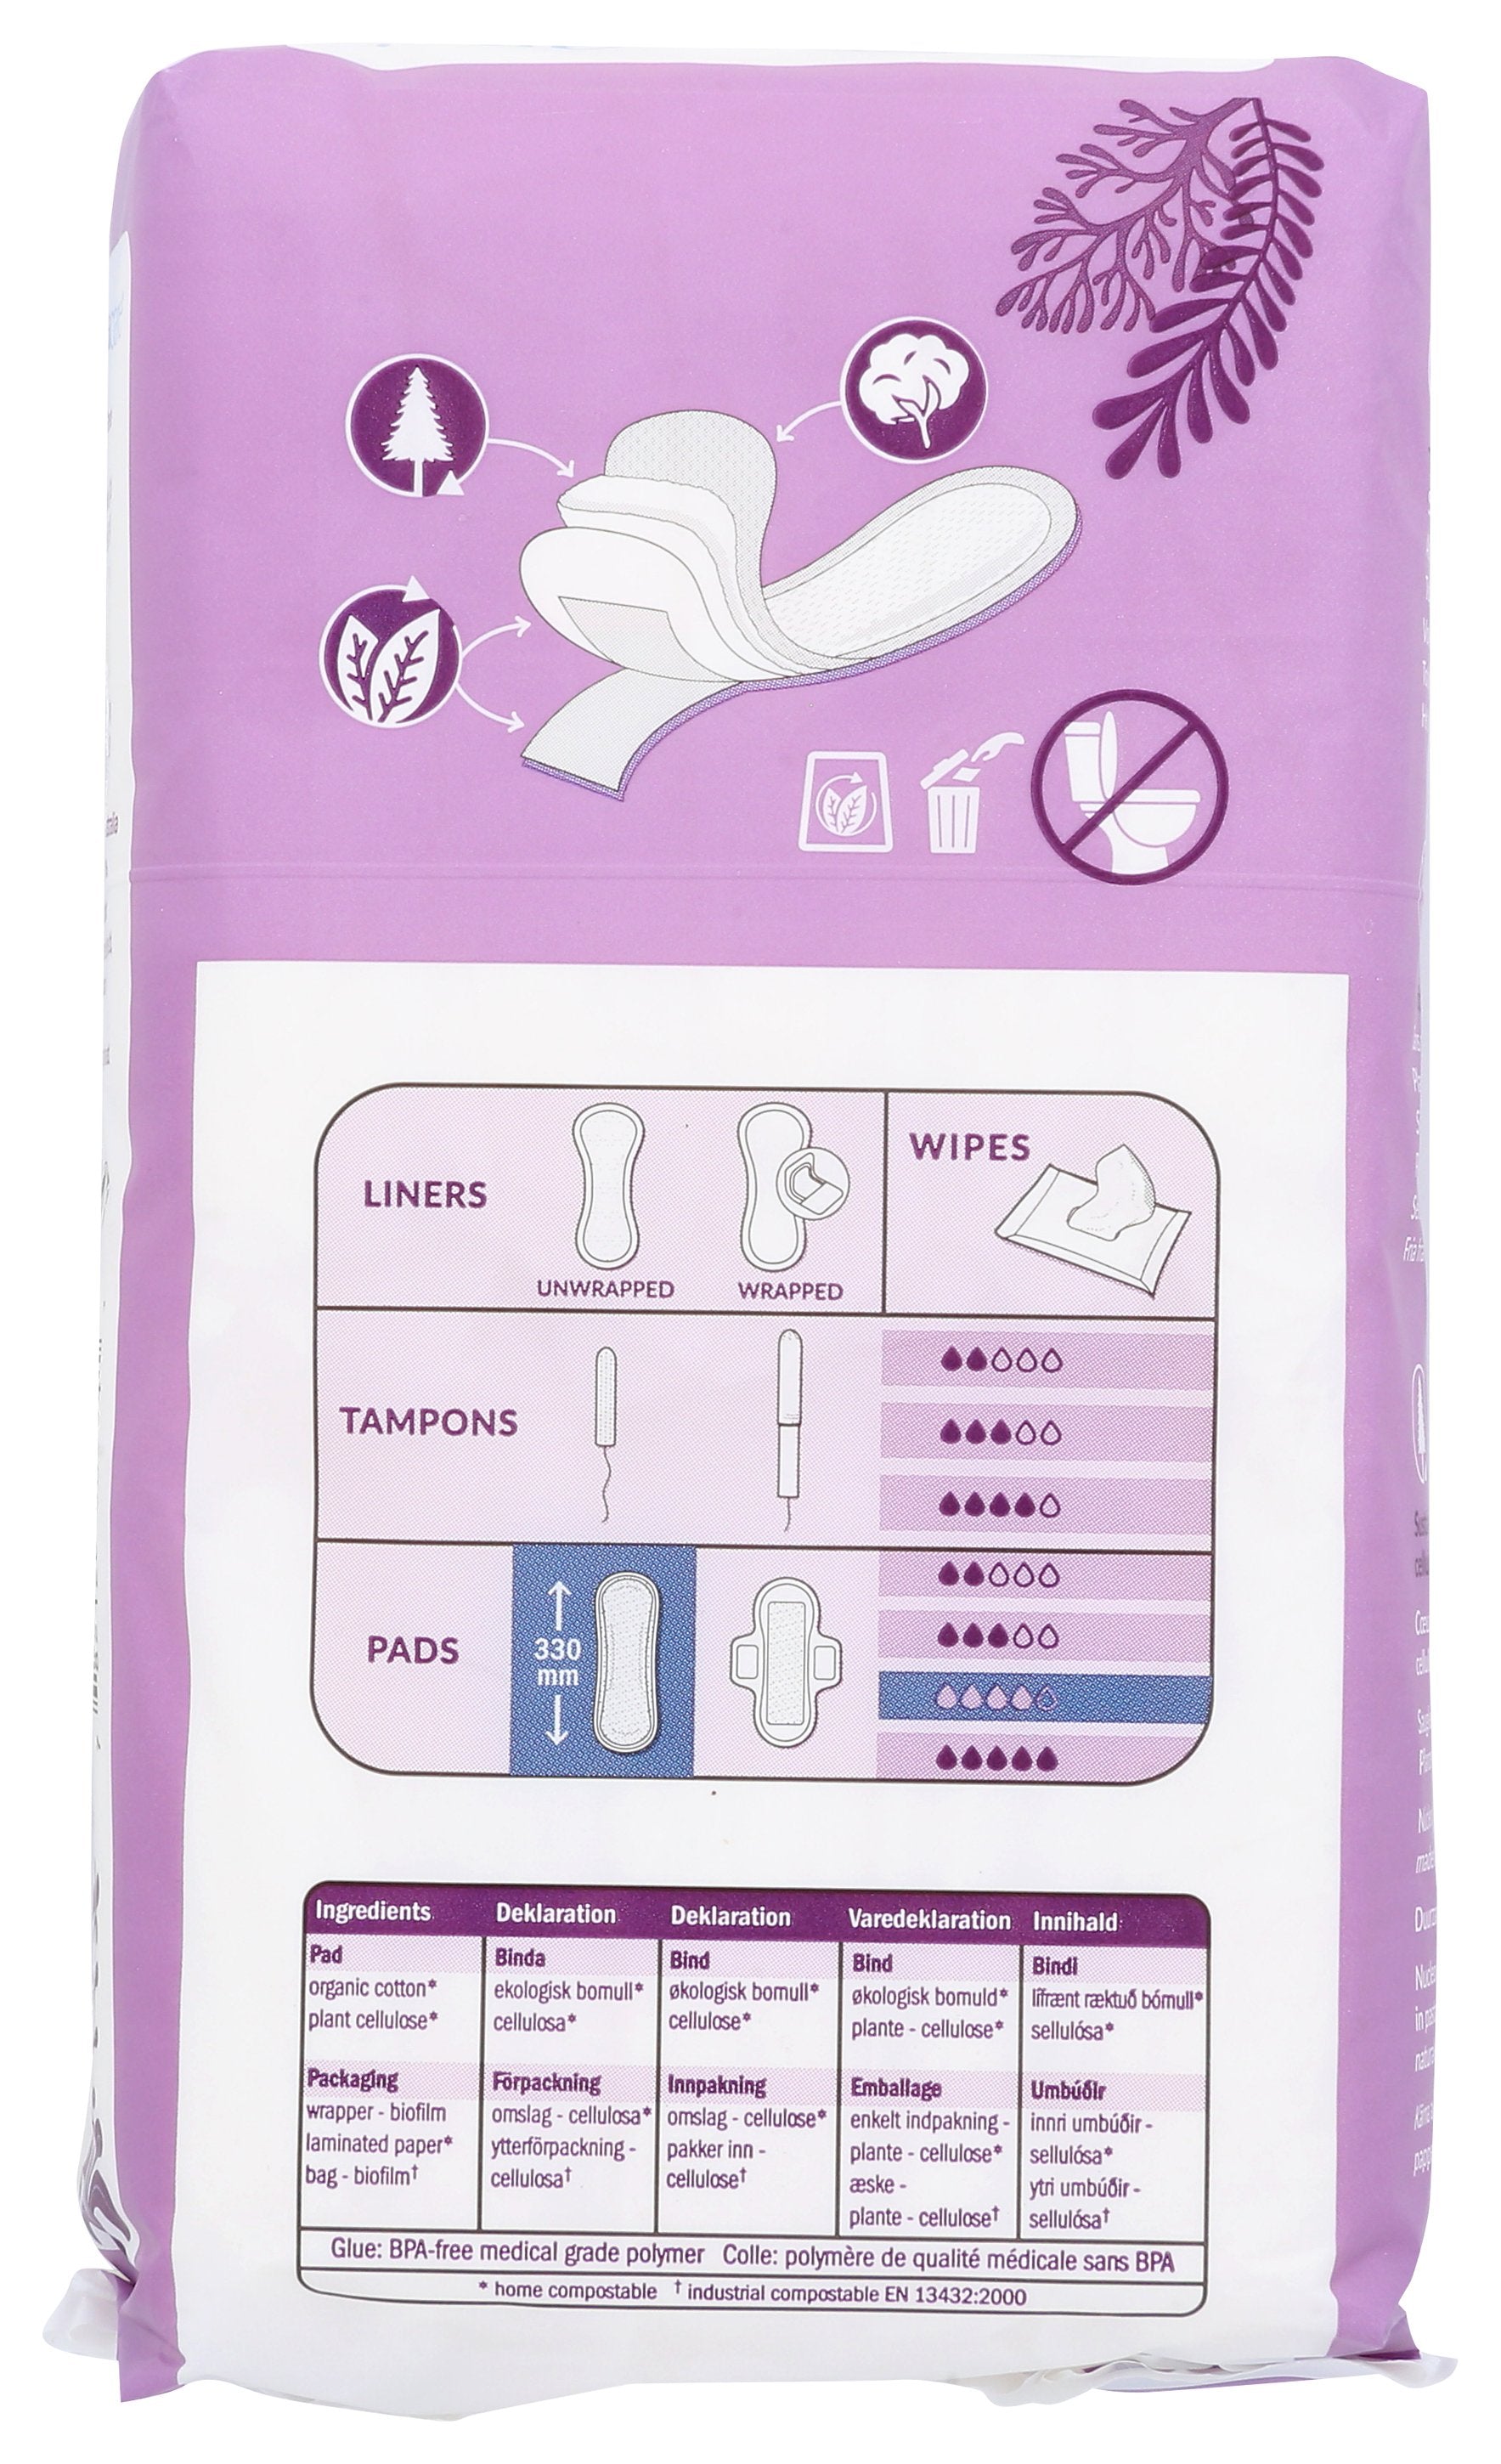 NATRACARE PADS NIGHT TIME MAXI - Case of 3